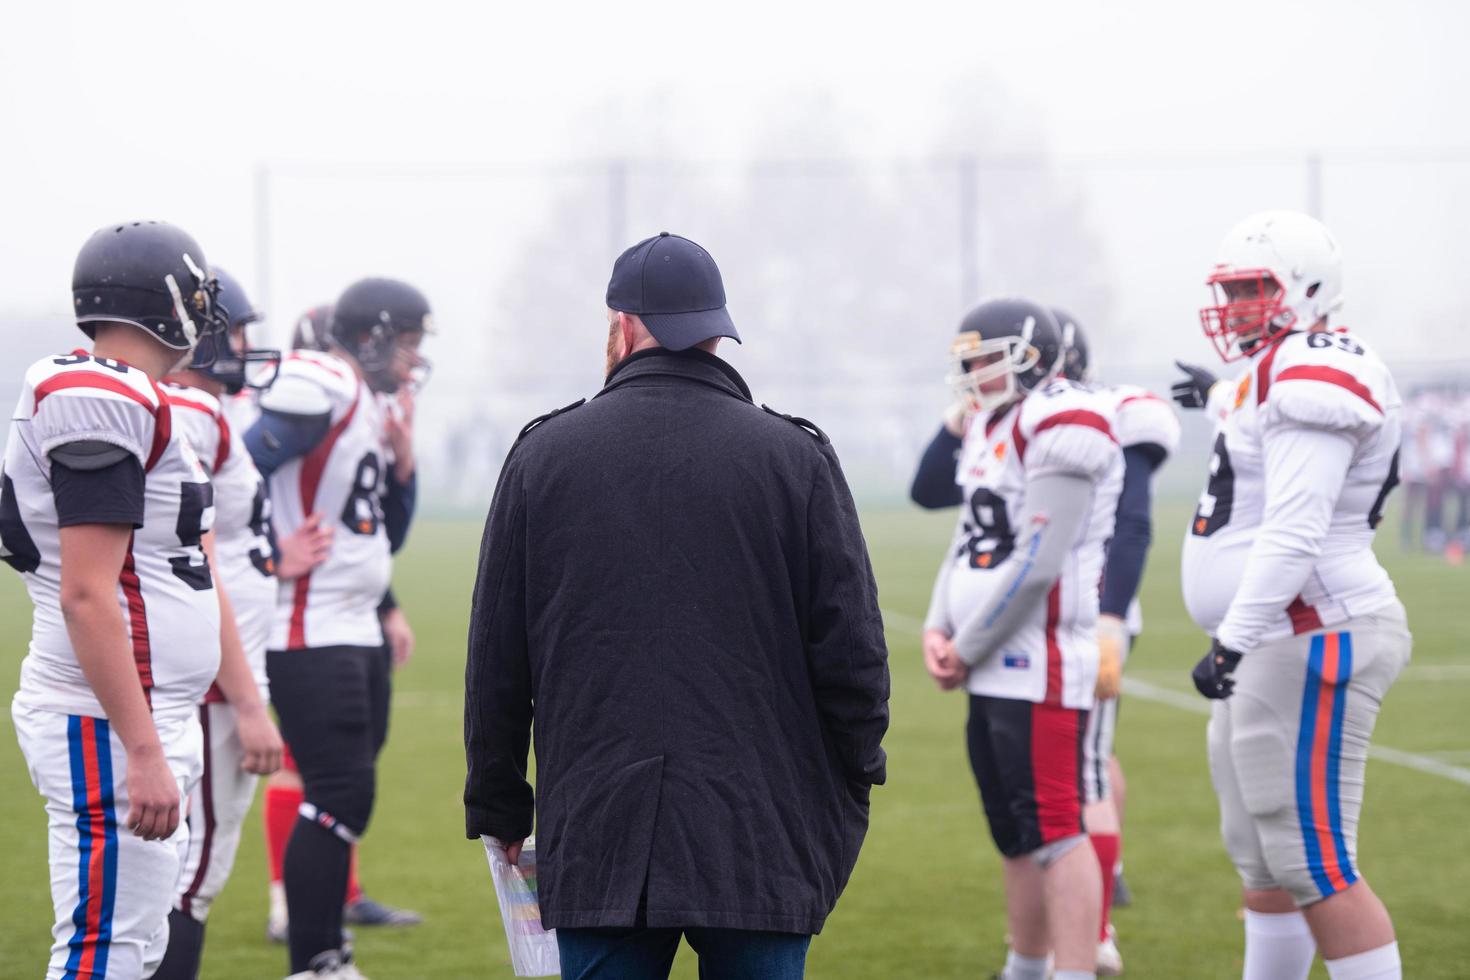 american football players discussing strategy with coach photo